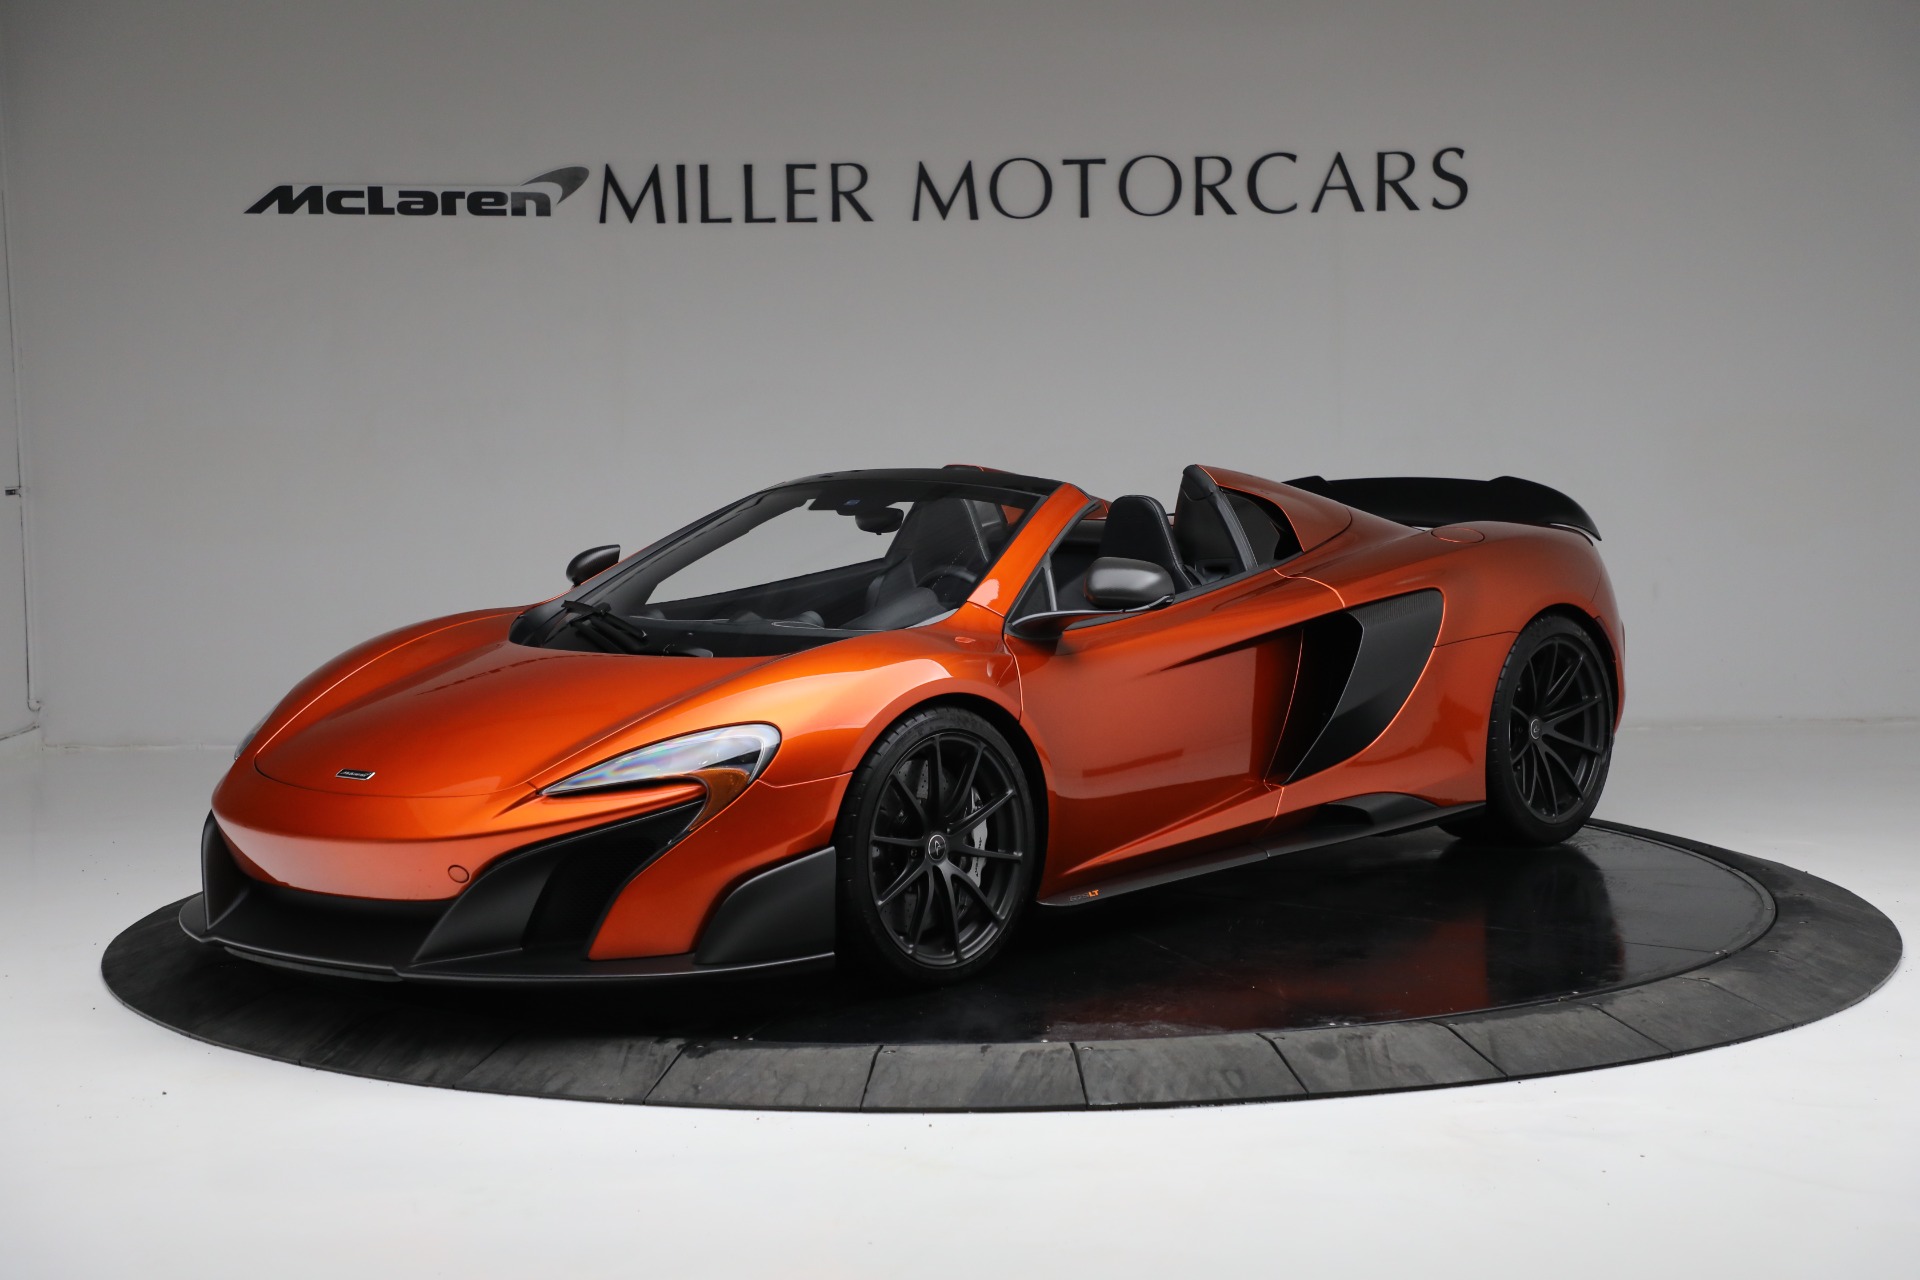 Used 2016 McLaren 675LT Spider for sale $284,900 at Pagani of Greenwich in Greenwich CT 06830 1